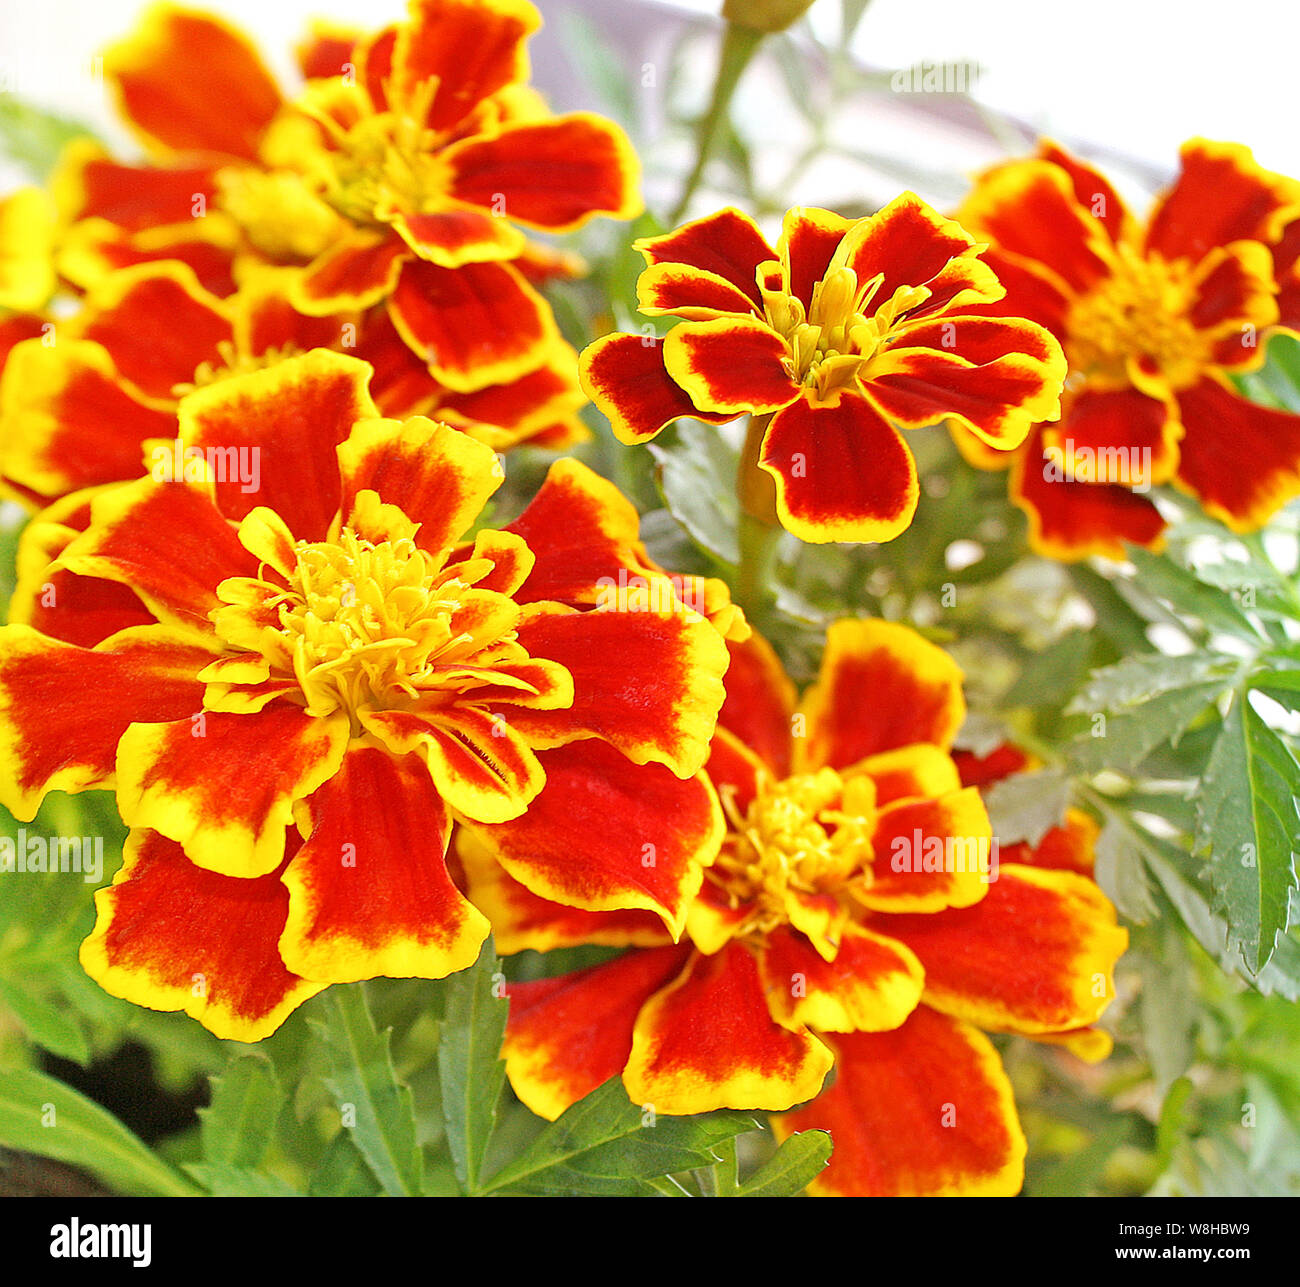 The Marigold flower with petals of bright yellow and orange Stock Photo